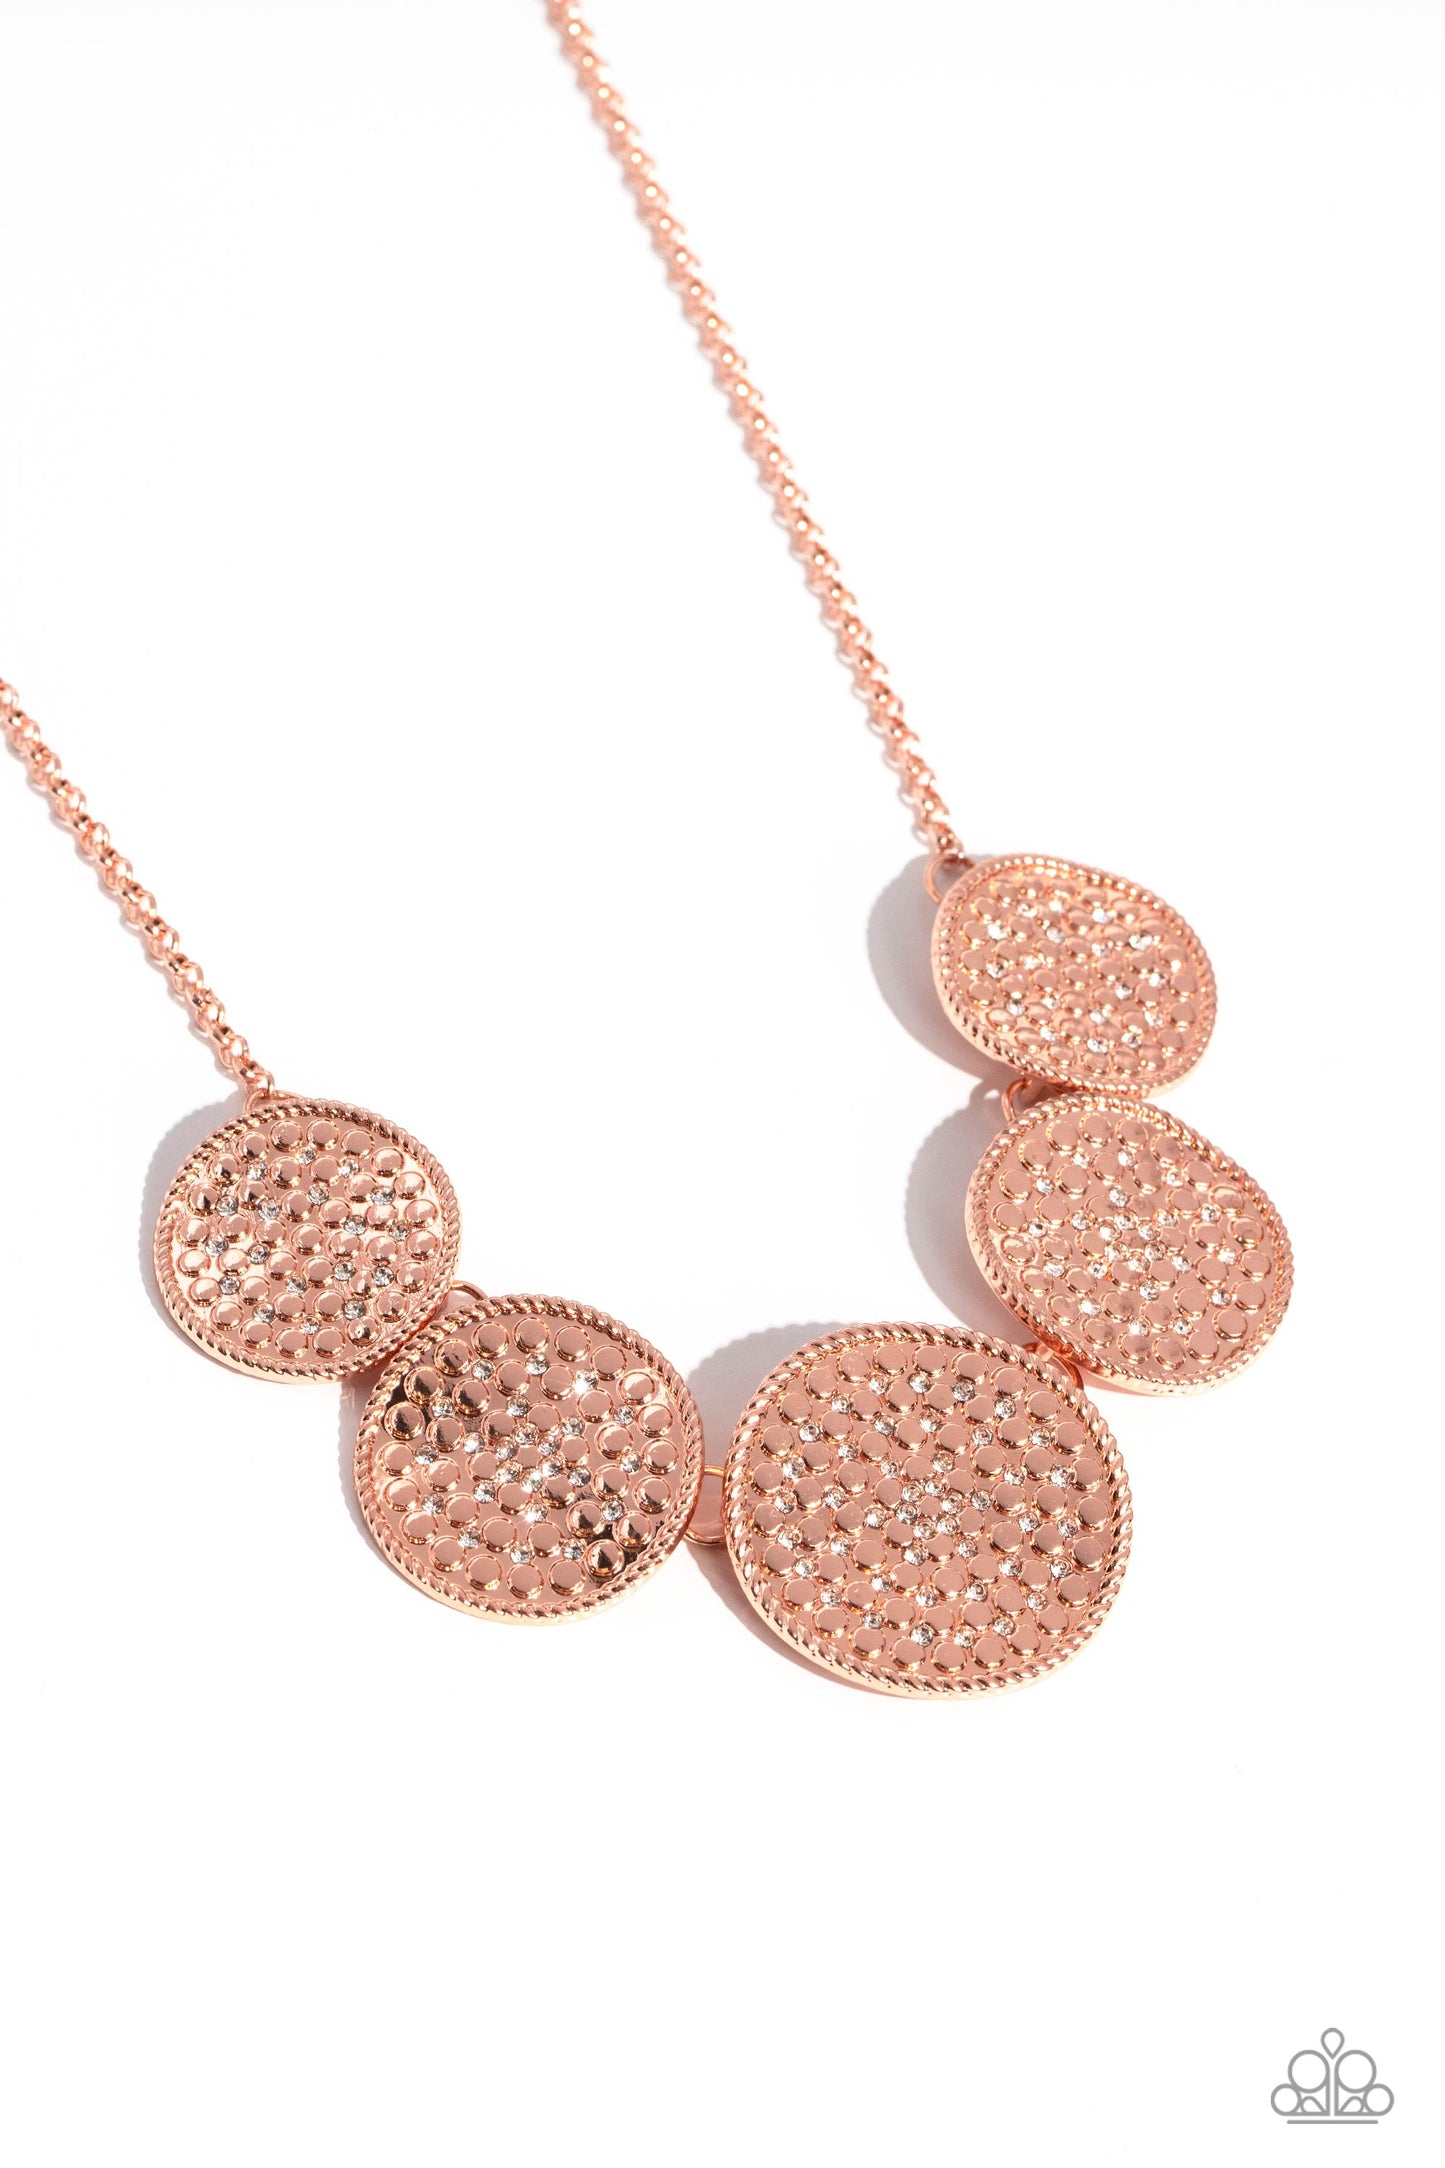 Medaled Mosaic - Copper Shiny Discs/Sparkle Motif Paparazzi Necklace & matching earrings